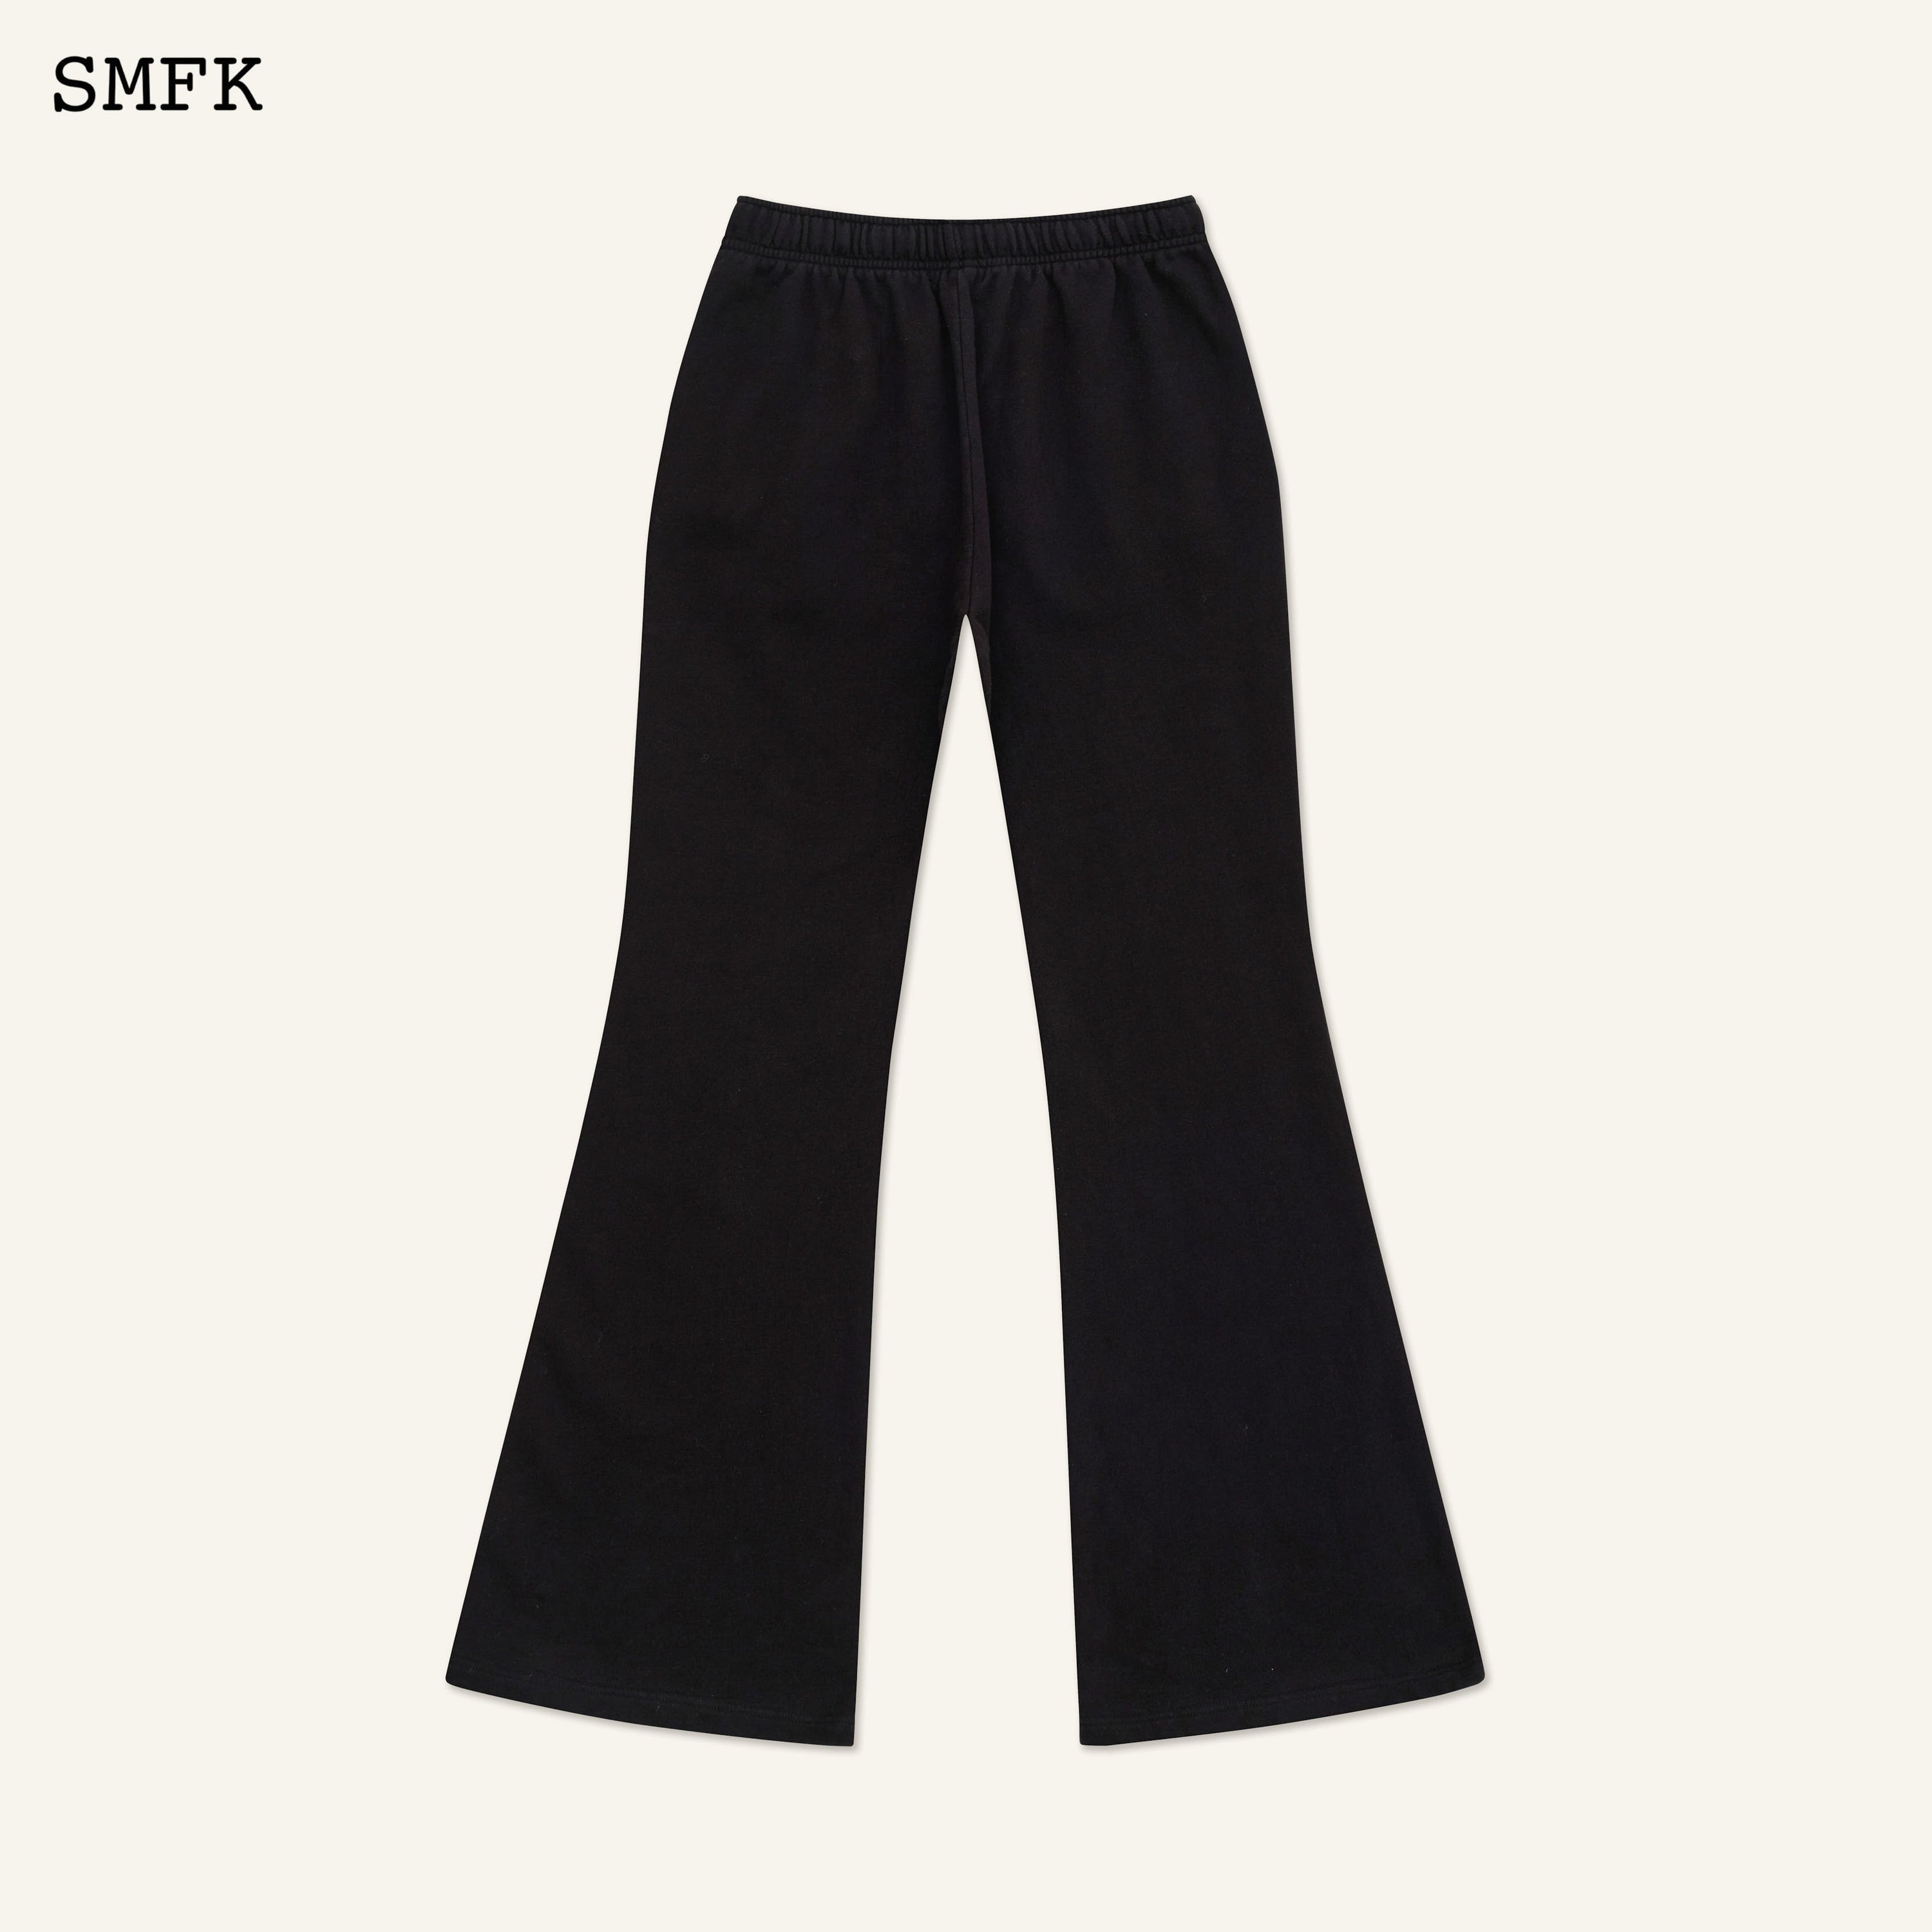 Compass Cross Classic Flared Sweatpants Black - SMFK Official